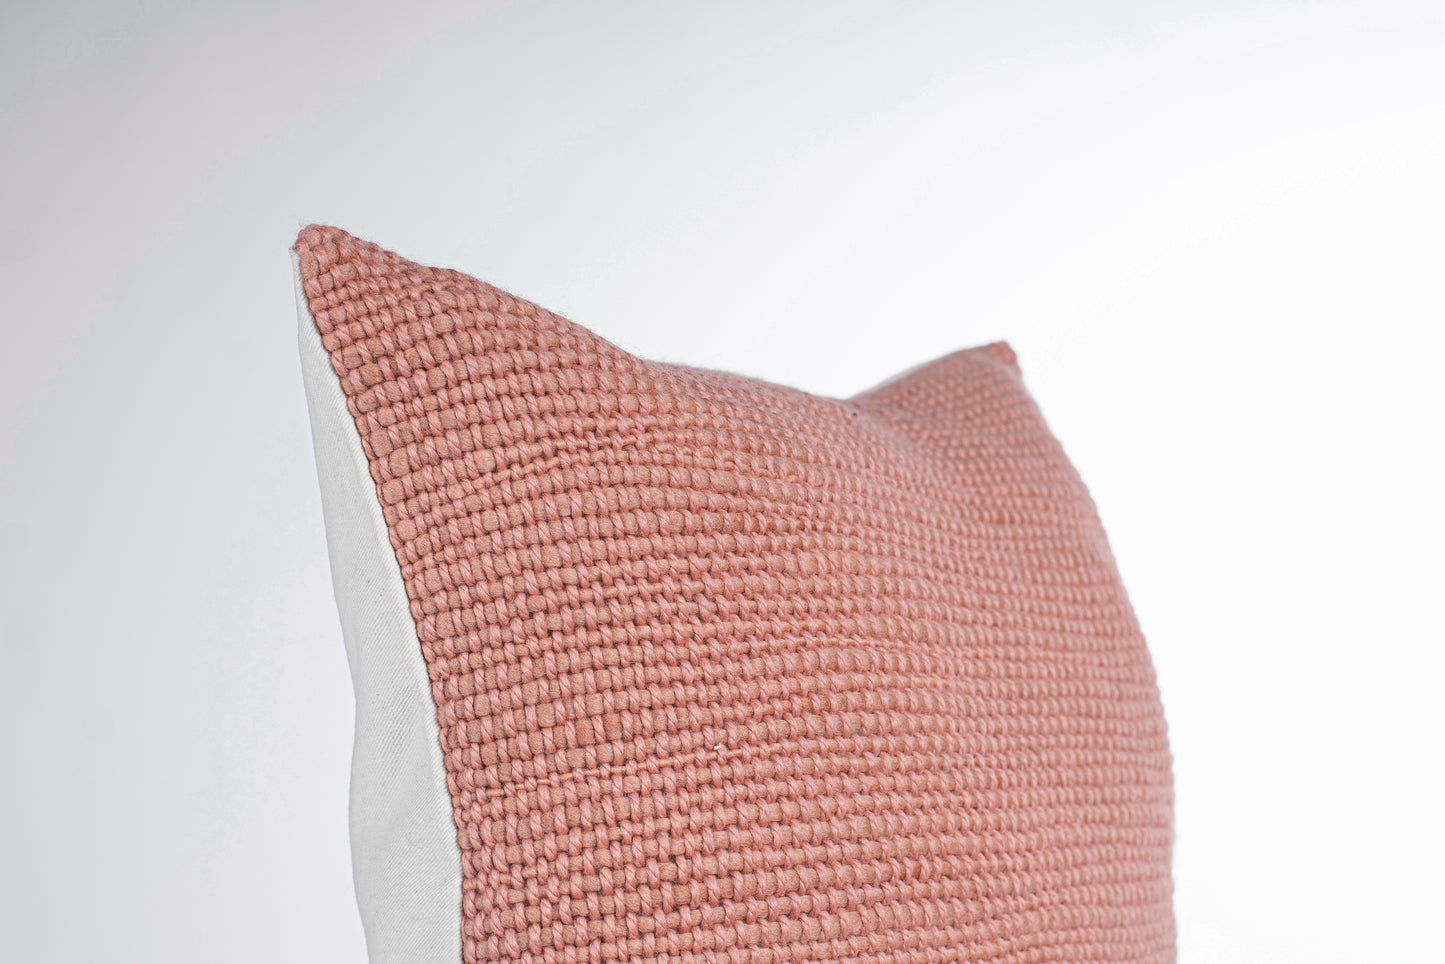 Couch Cushion Cover in Handwoven Dusty Rose Wool Niebla 18x18